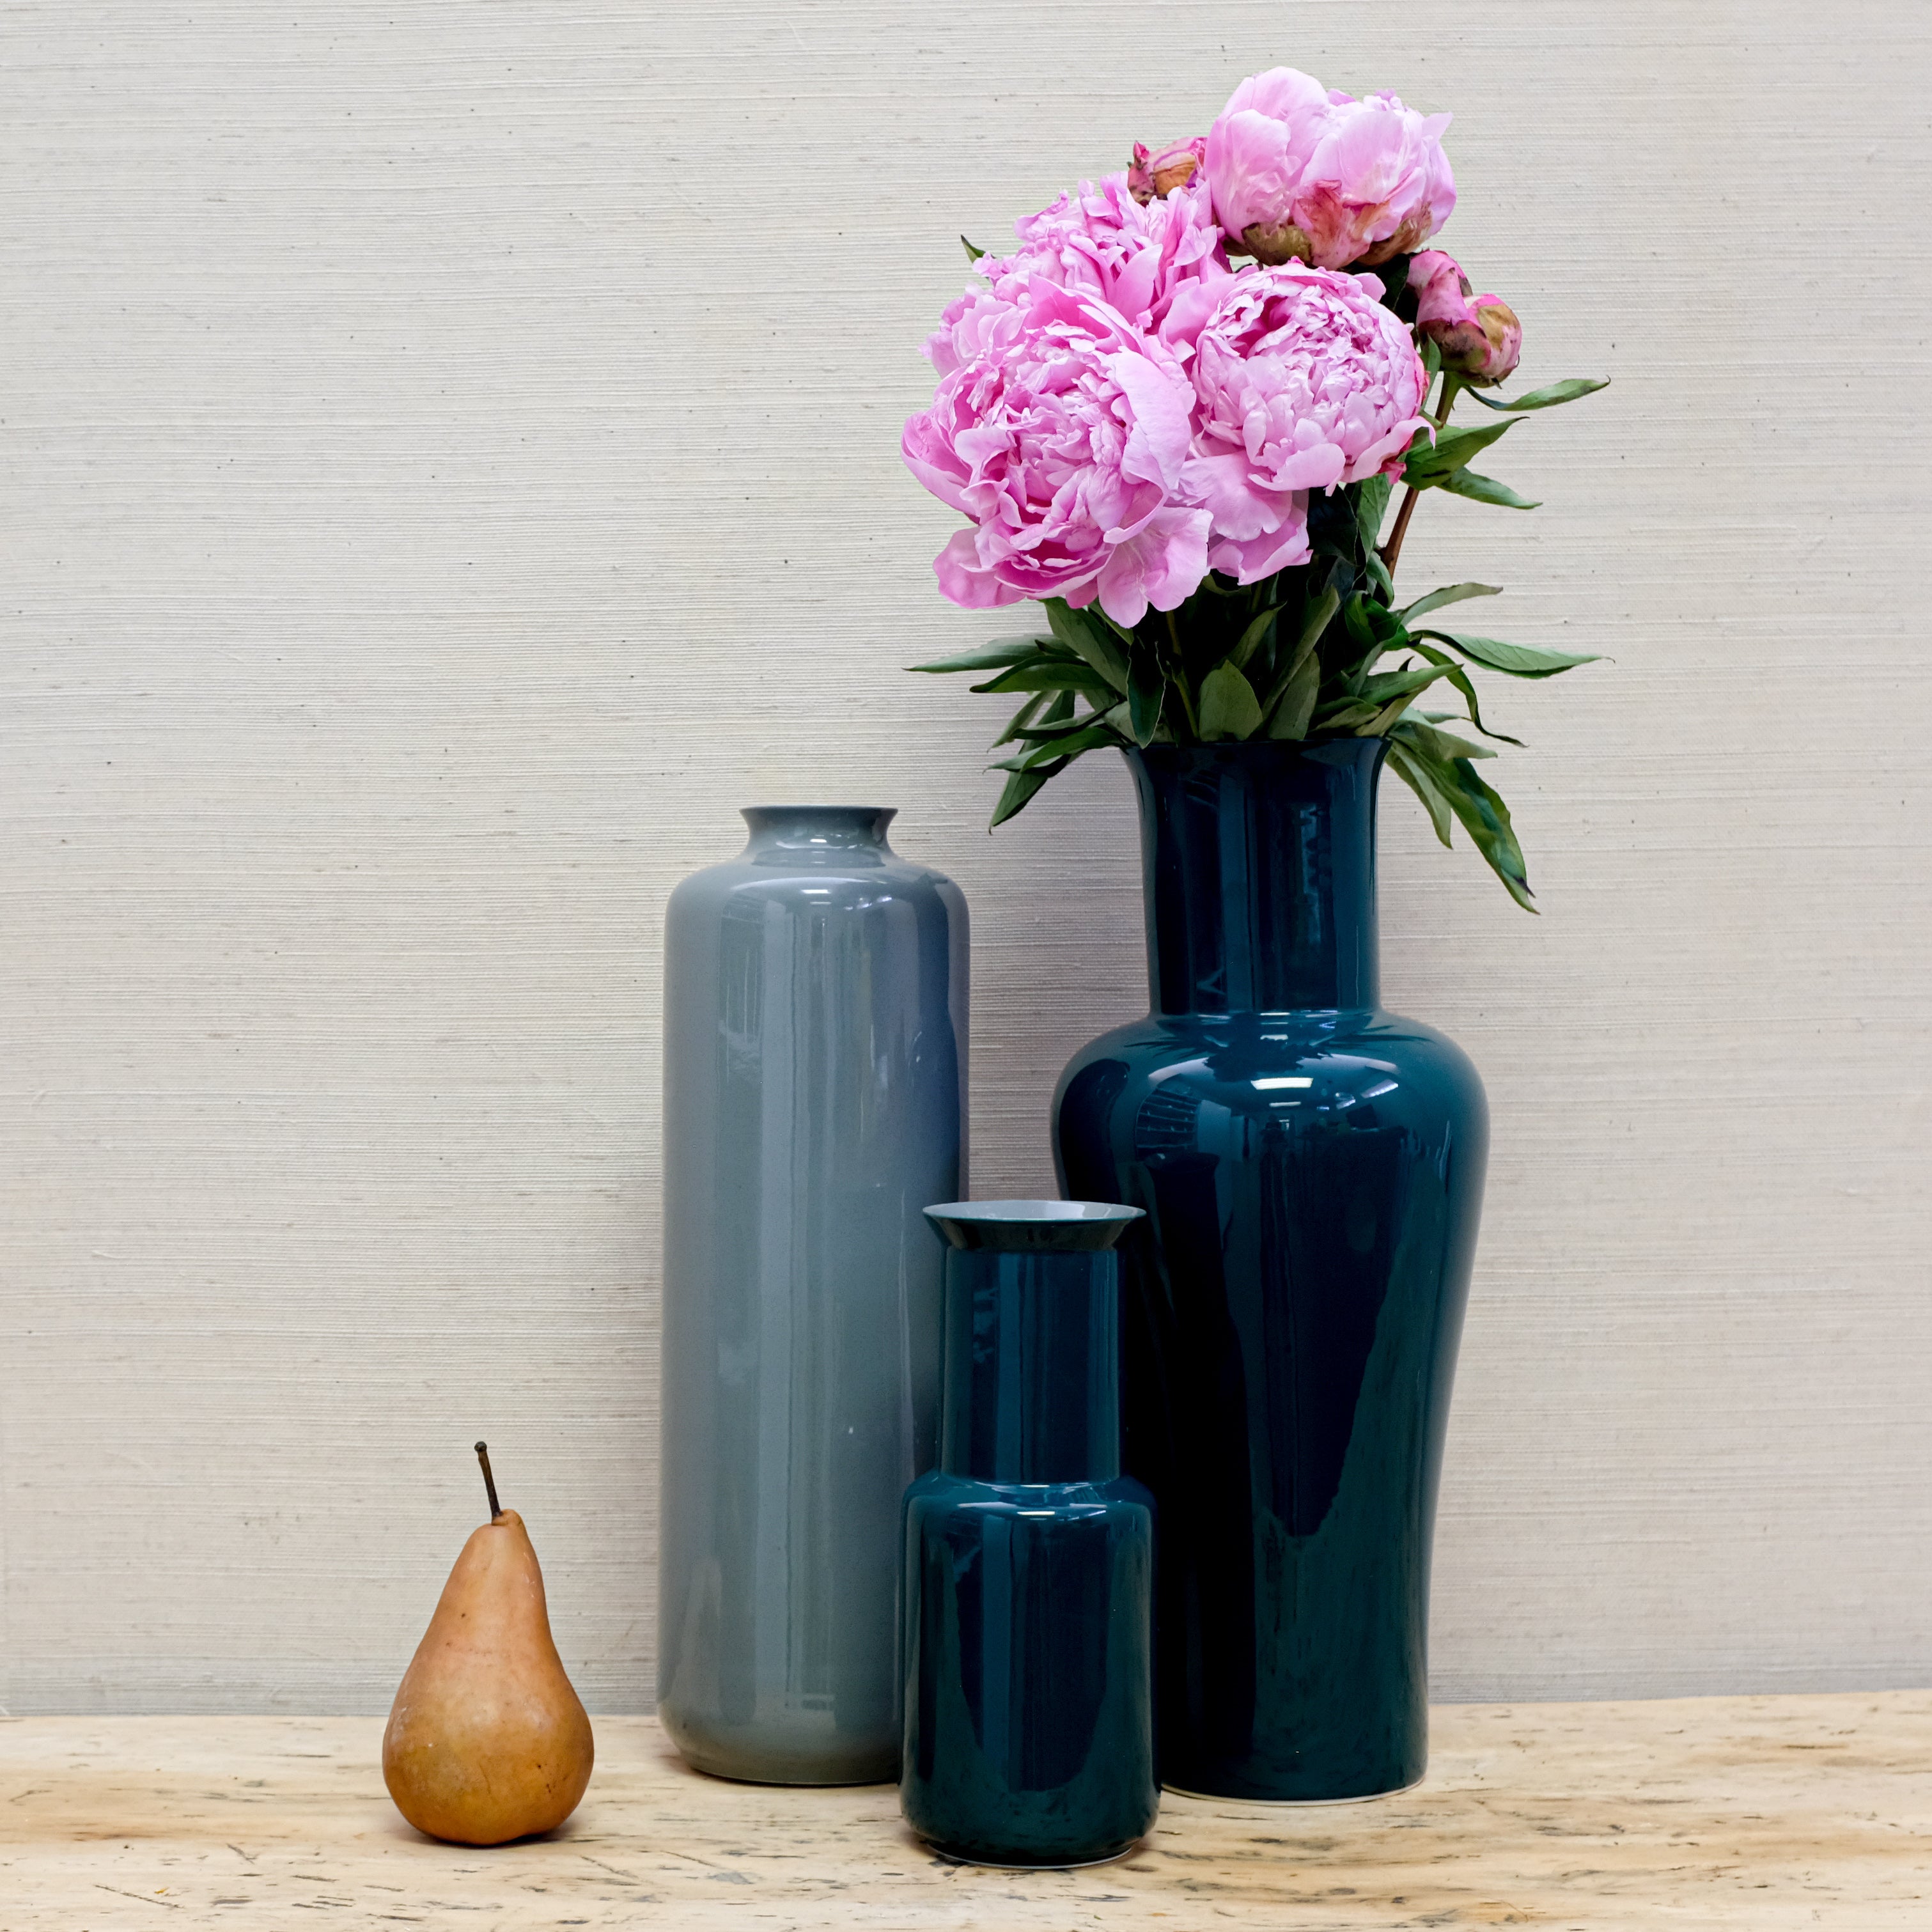 trio of glossy vases with peonies and a pear